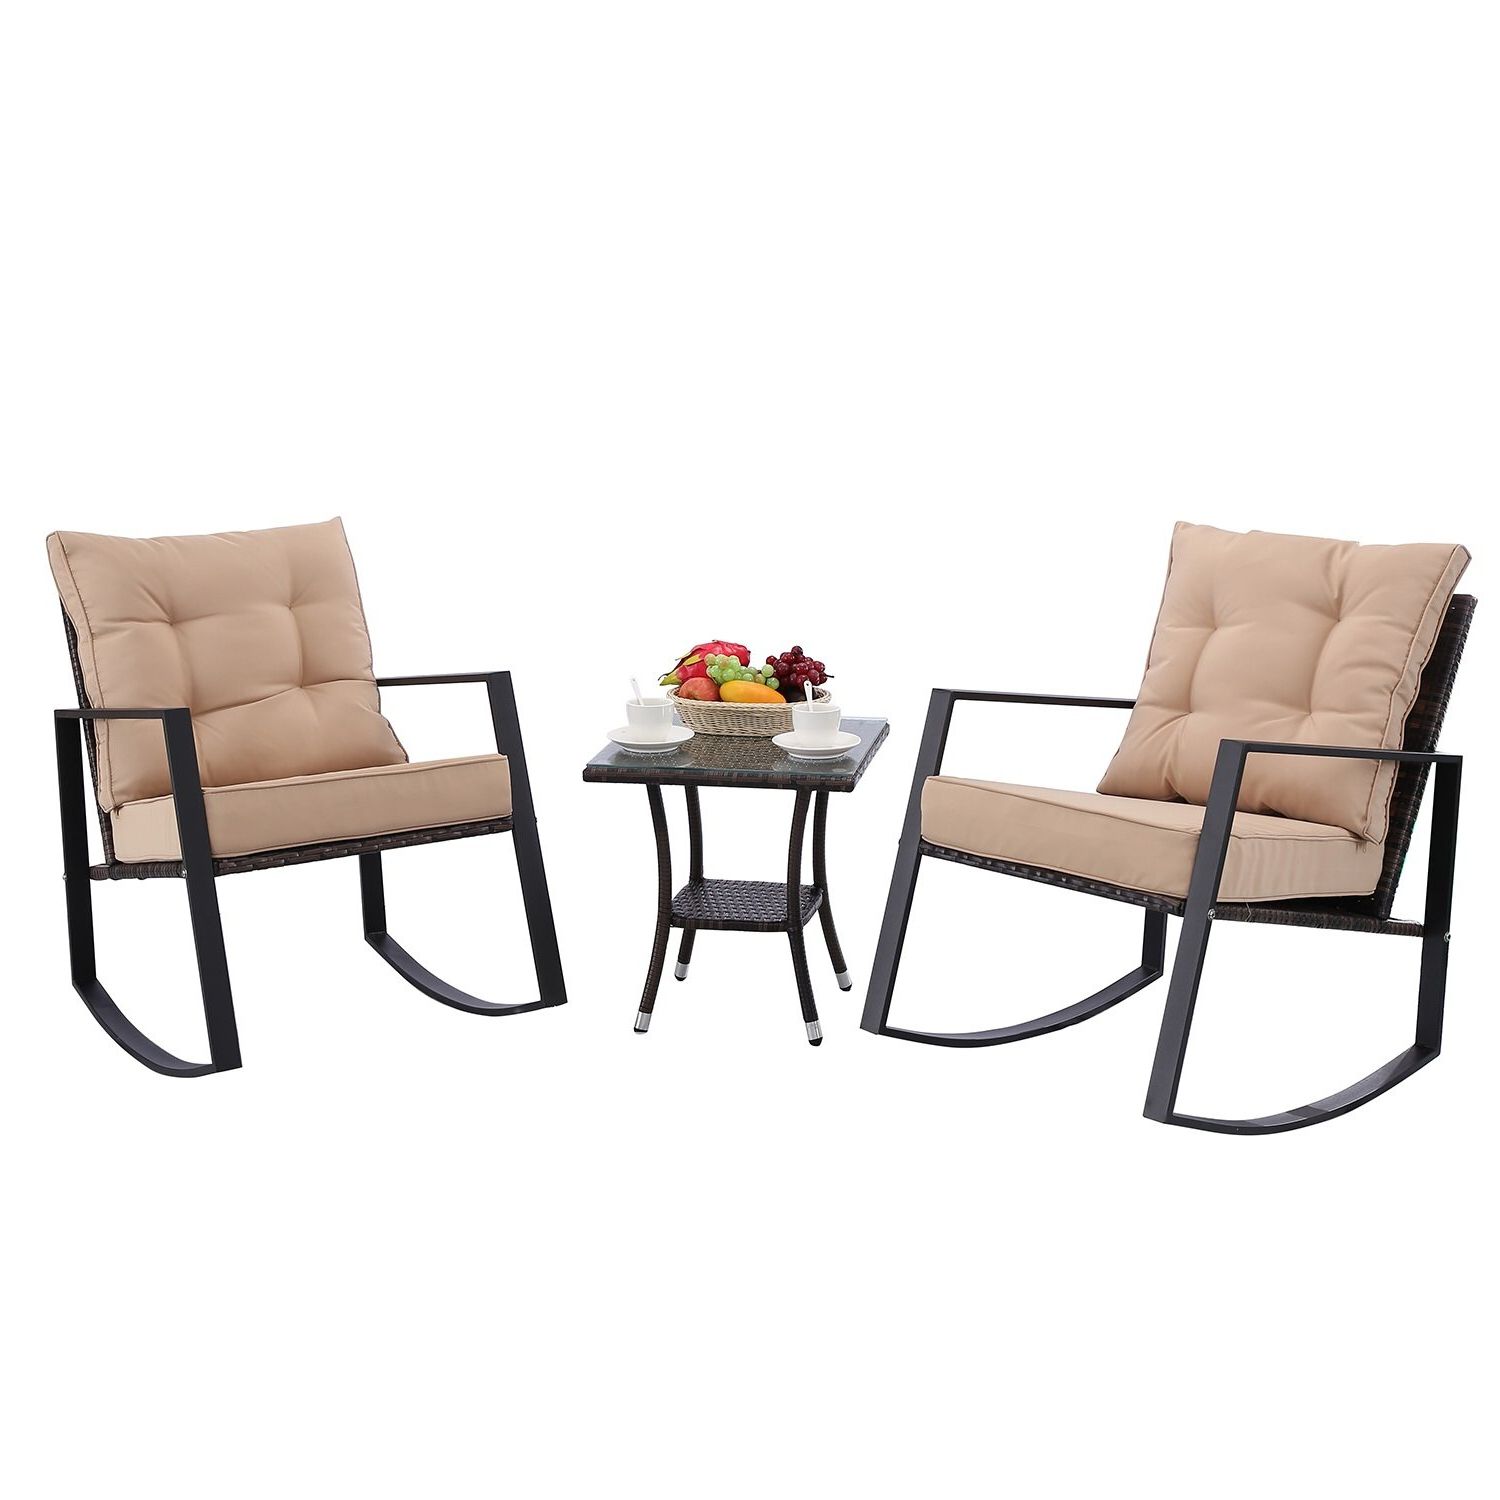 Outdoor Rocking Chair Sets With Coffee Table Pertaining To Most Popular Htth 3 Pieces Outdoor Rocking Chair Bistro Set Steel Furniture With (View 1 of 15)